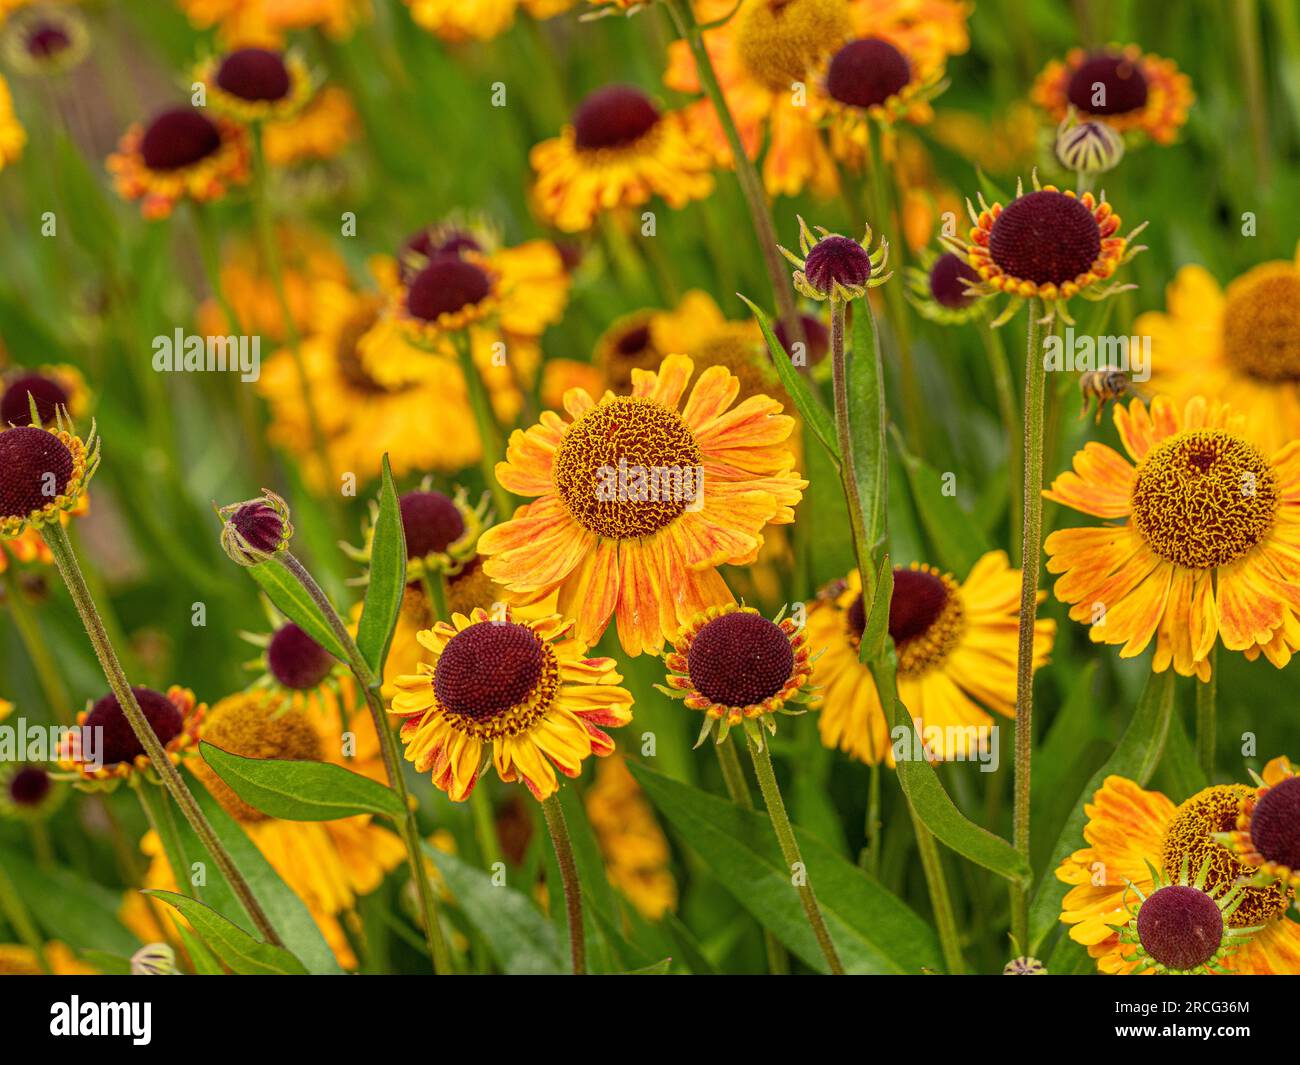 Helenium 'Wyndley' with its rich yellow petals streaked with orange growing in abundance in a garden. Stock Photo